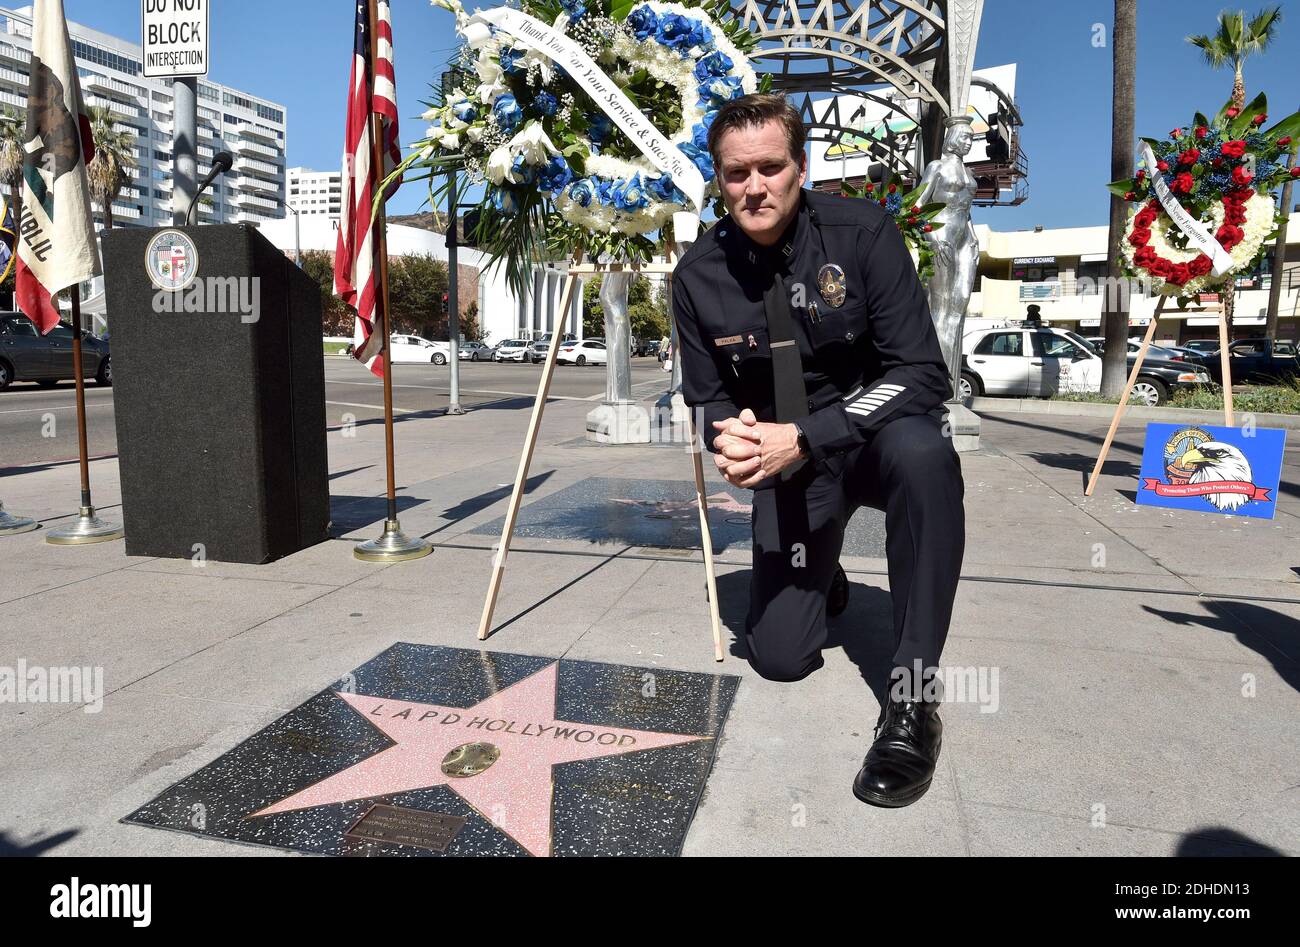 Cory Palka Captain III Hollywood Division attends the unveiling ceremony of the LAPD Hollywood star honring the Los Angeles Police Department Hollywood Division fallen police officers. The fallen officers are: Policeman Clyde Pritchett (1936), Policeman Clay N. Hunt (1955), Policeman Ian J. Campbell (1963), Police Officer Robert J. Cote (1969), Detective Russell L. Kuster (1990), Police Officer Joe Rios (1993), Police Officer Charles D. Heim (1994) and Police Officer Nicholas Lee (2014). October 23, 2017 in Los Angeles, California. Photo by Lionel Hahn/AbacaPress.com Stock Photo